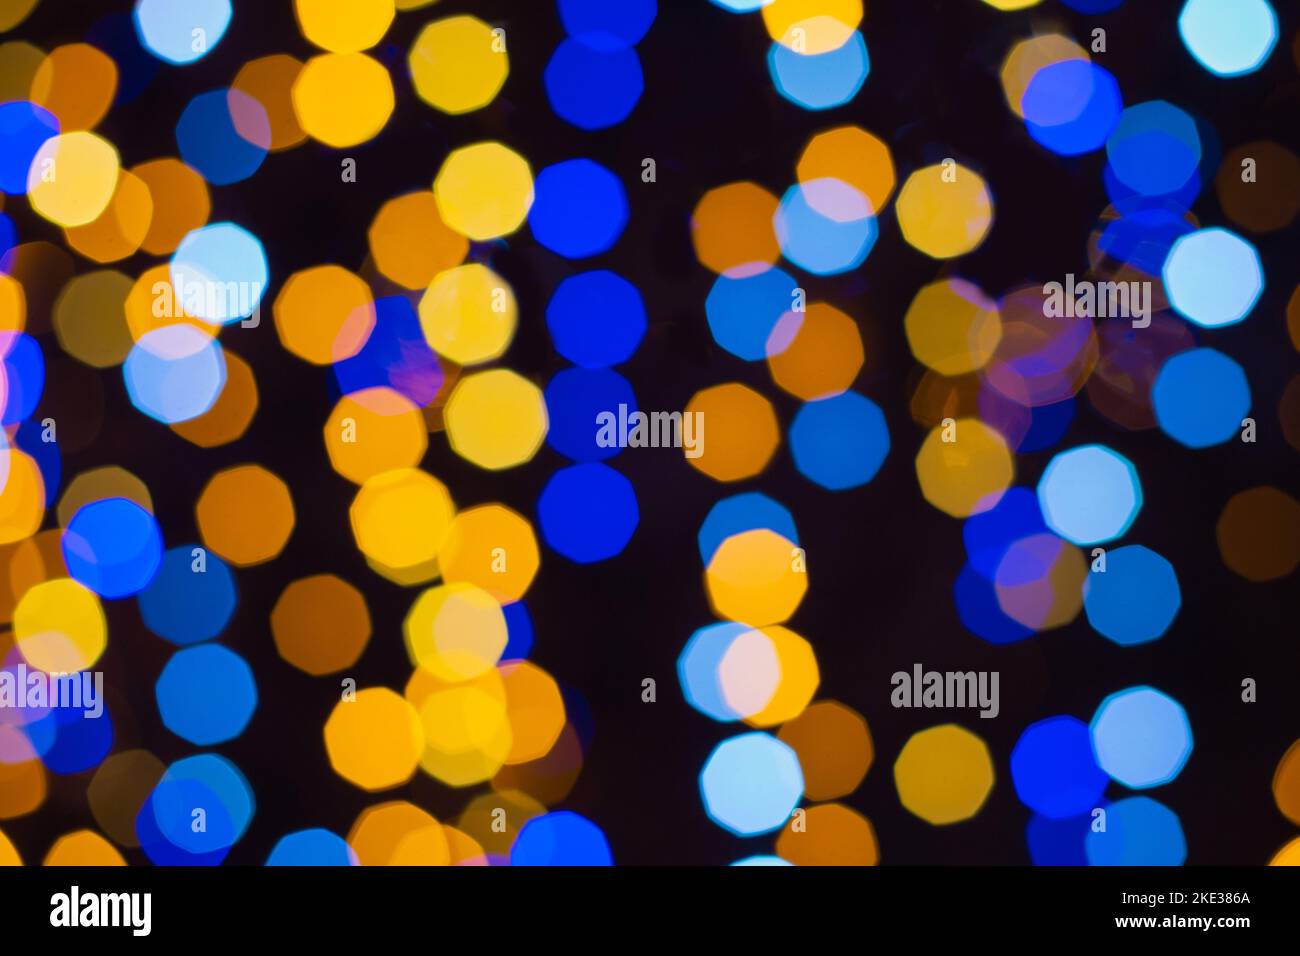 Defocused christmas yellow and blue abstract bokeh lights background. Festive lights. Blurred holiday bokeh. Stock Photo